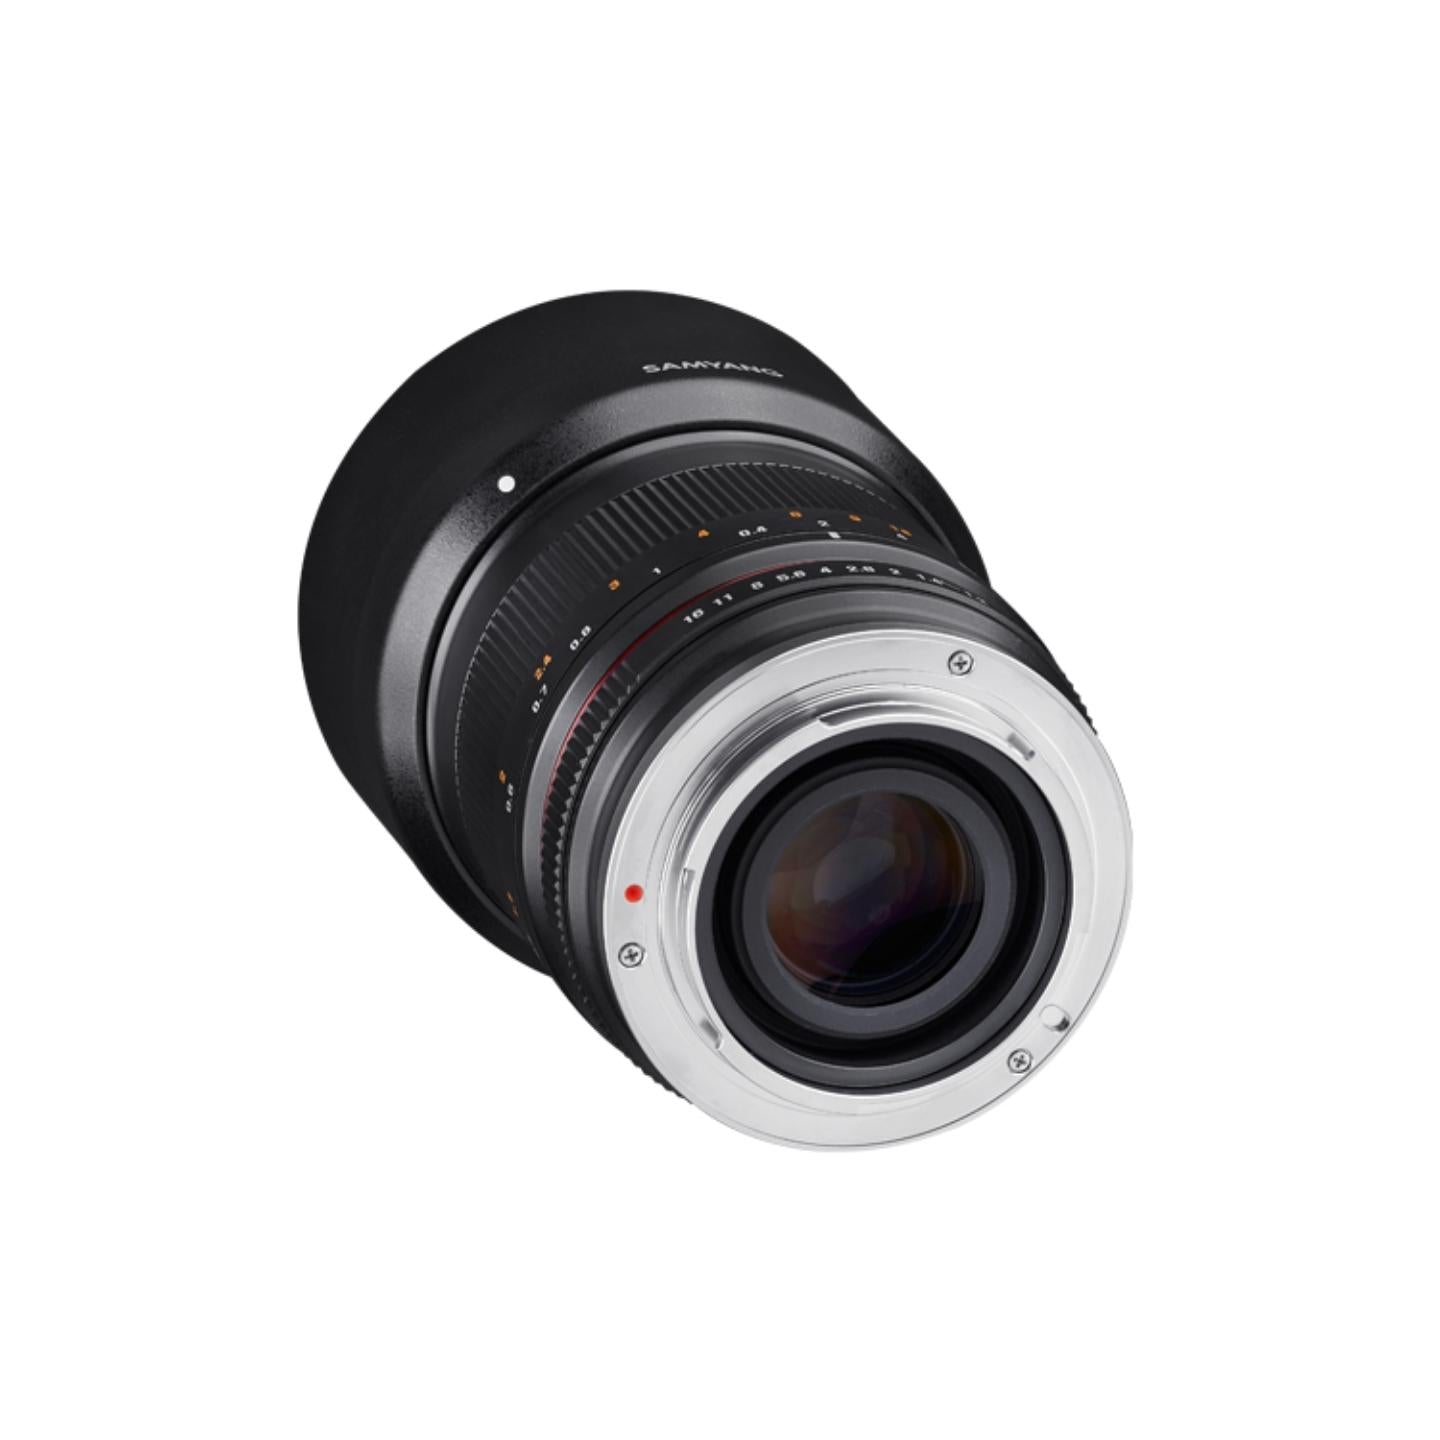 Samyang 50mm f/1.2 CSC Manual Focus APS-C Prime Lens for Fujifilm X Mount Mirrorless Camera with Flare and Ghosting Reduction | SY50M-FX